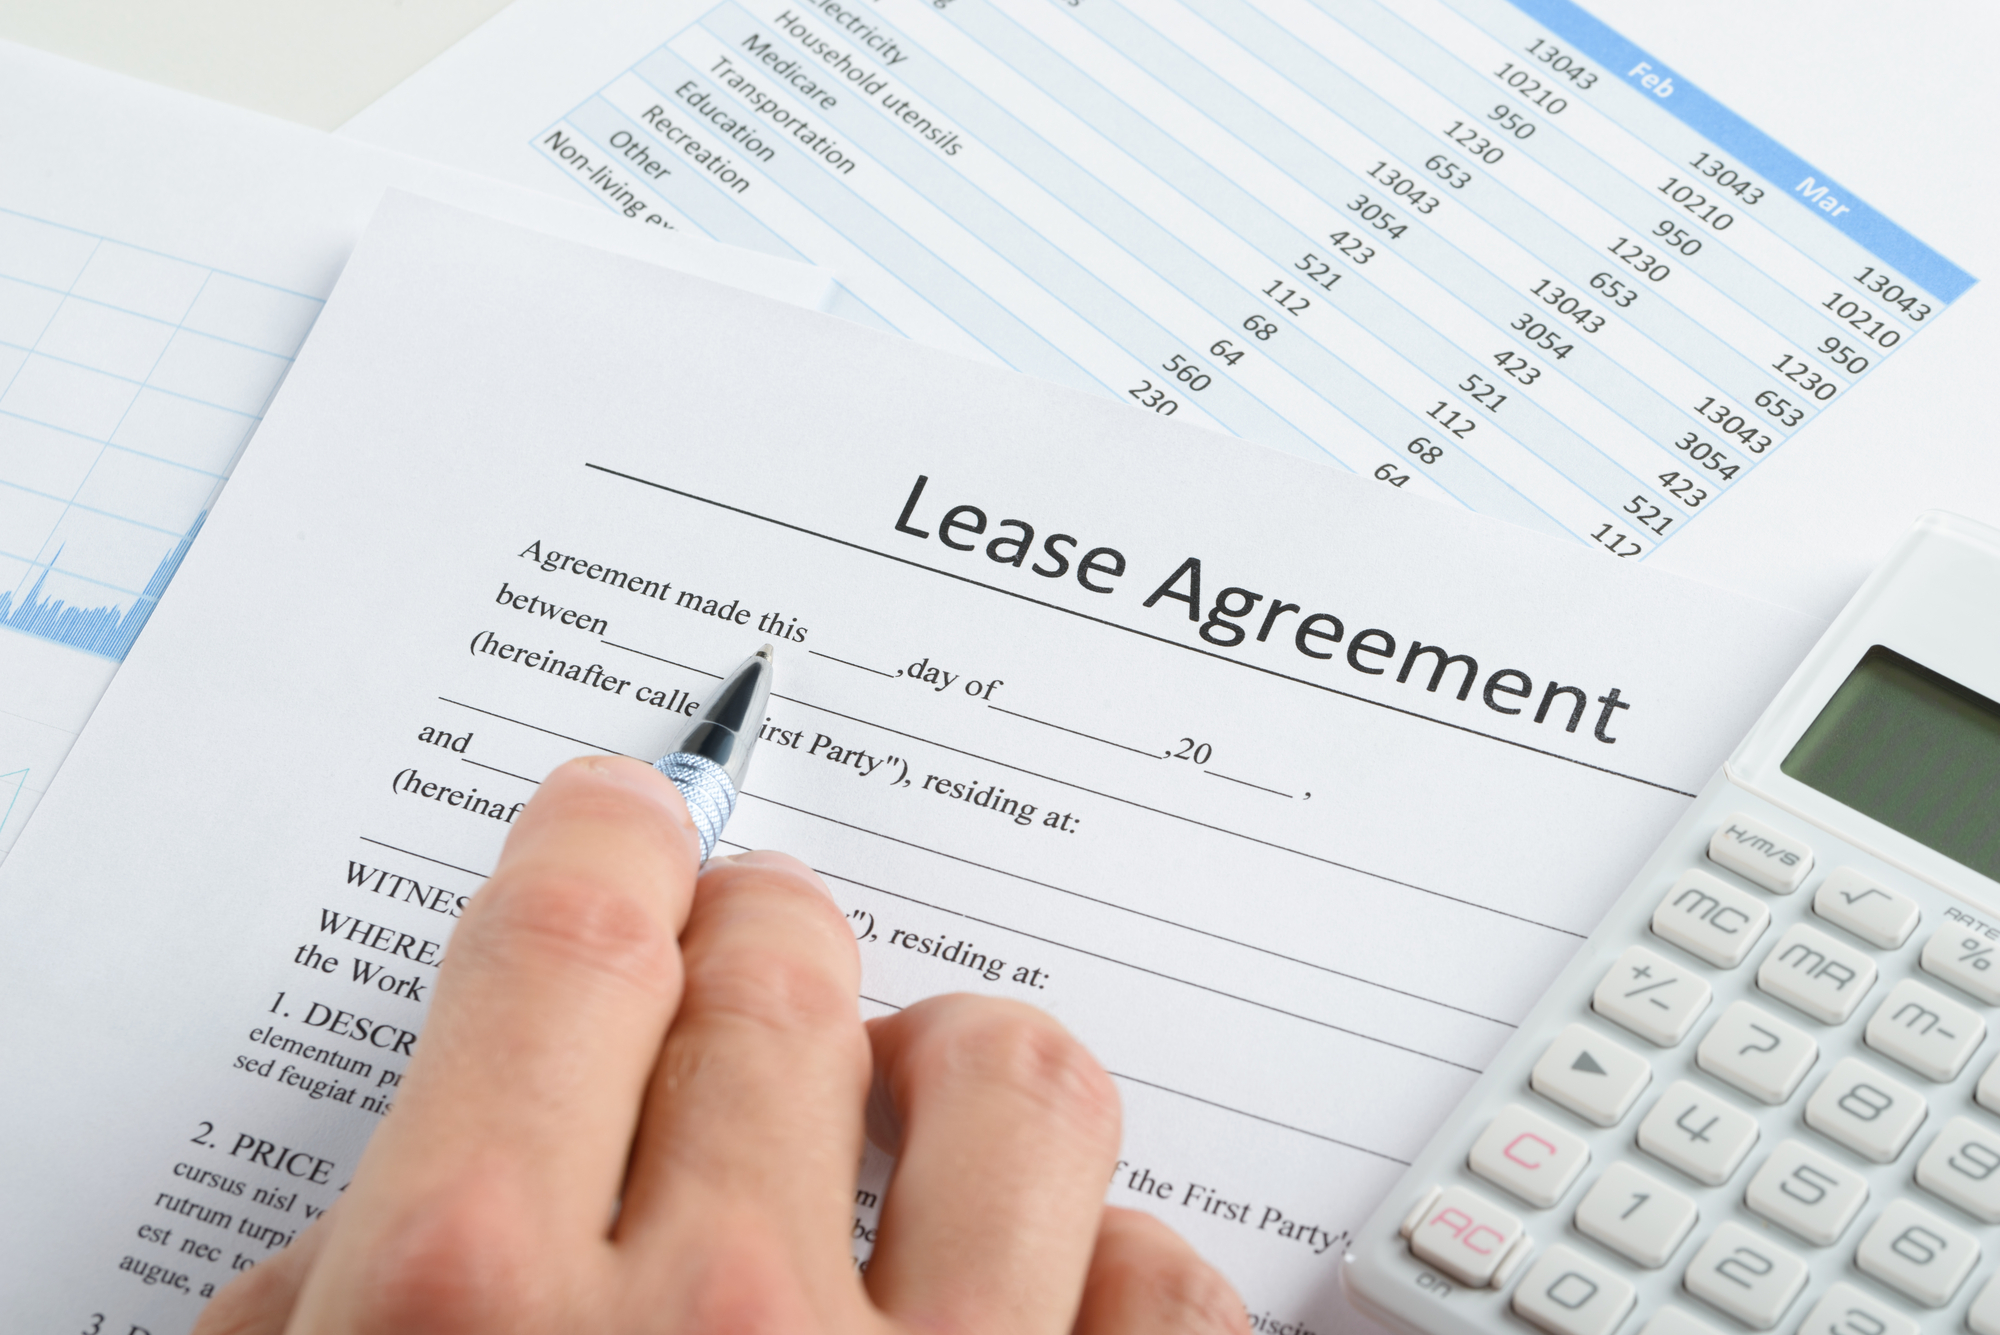 Is Your Orlando Lease Agreement Complete? Make Sure It Includes These 7 Things